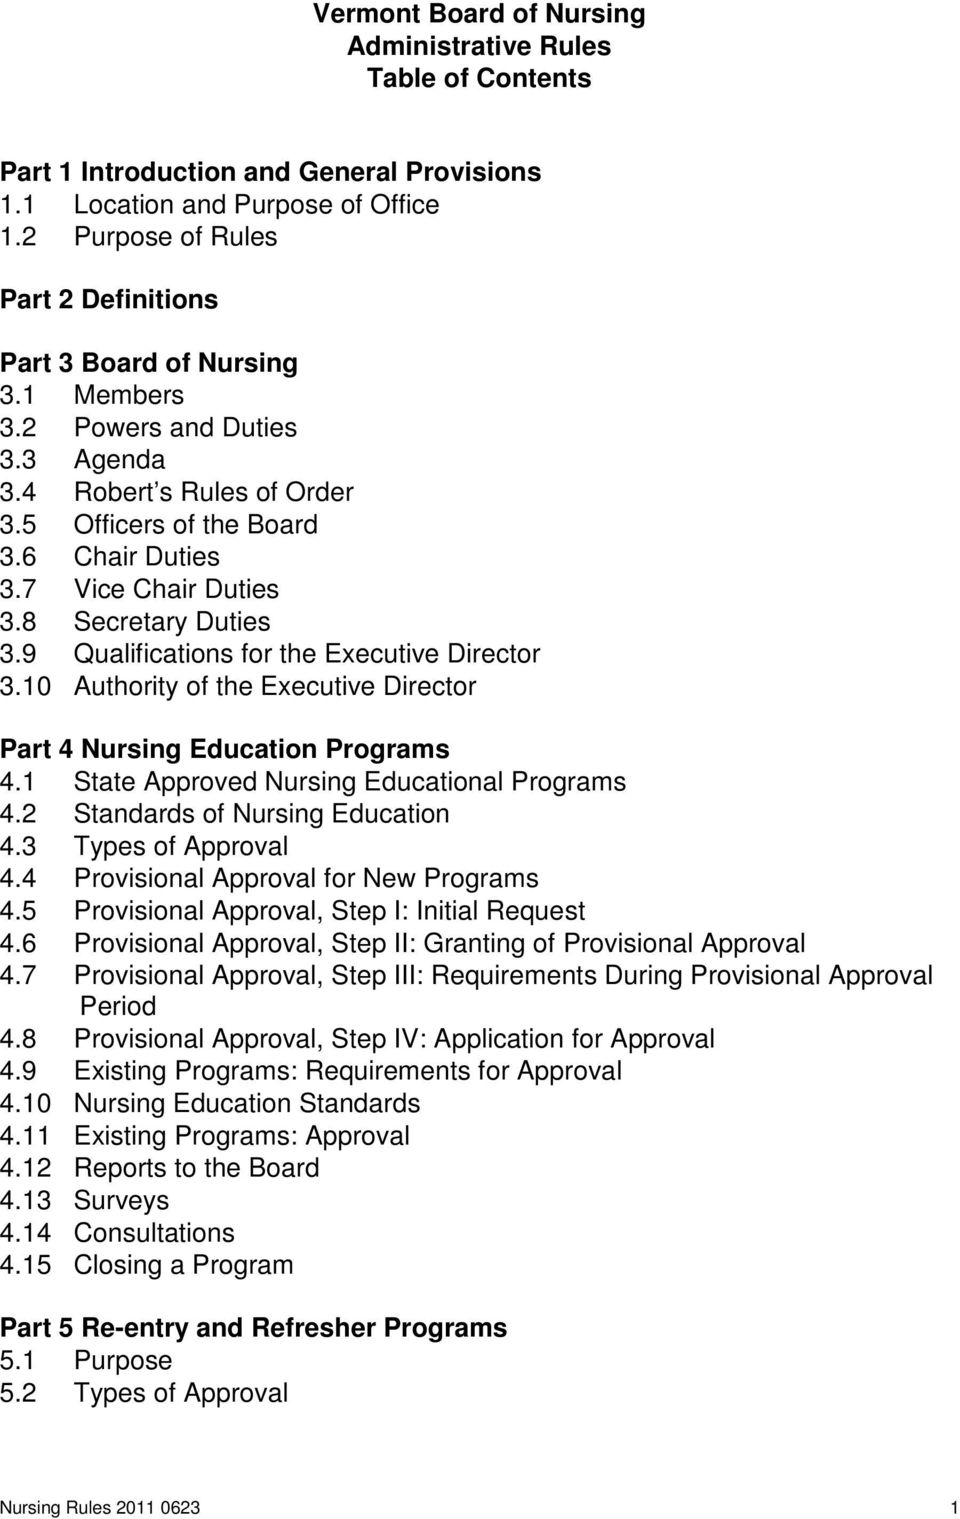 7 Vice Chair Duties 3.8 Secretary Duties 3.9 Qualifications for the Executive Director 3.10 Authority of the Executive Director Part 4 Nursing Education Programs 4.